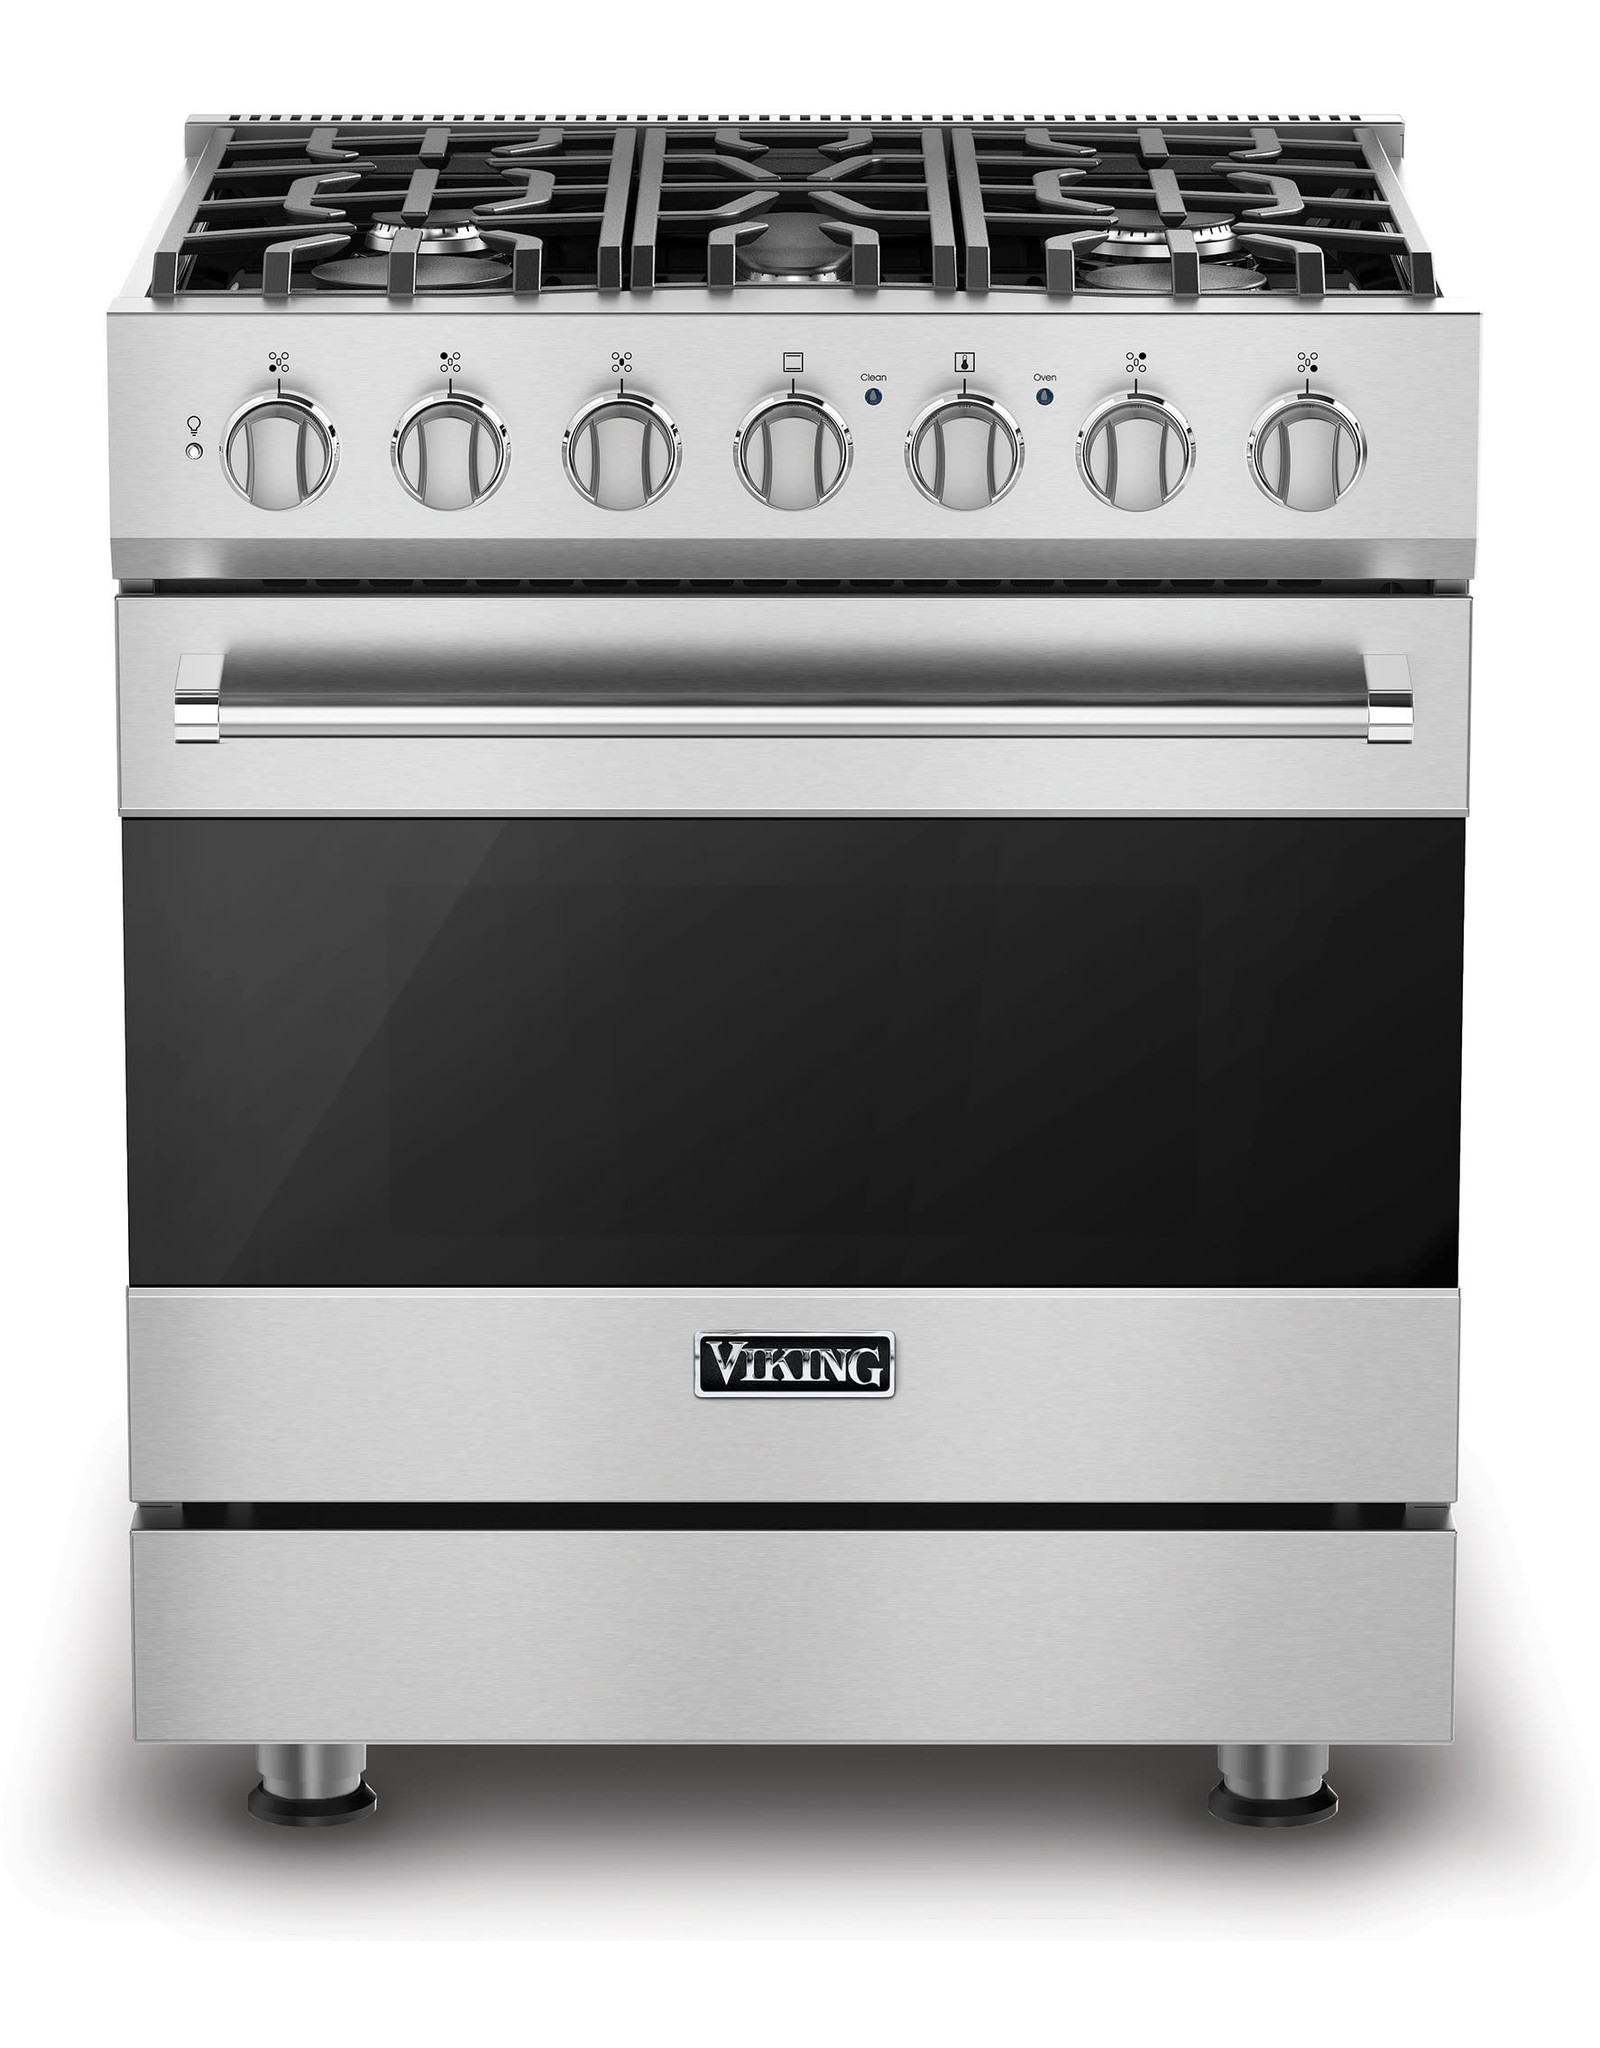 viking RVGR33025BSS 30 Inch Freestanding Gas Range with 5 Sealed Burners, 4 Cu. Ft. Oven Capacity, Continuous Grates, Self-Clean, SureSpark™ Ignition System, TruGlide™ Oven Racks, and ProFlow™ Convection Baffle: Stainless Steel, Natural Gas